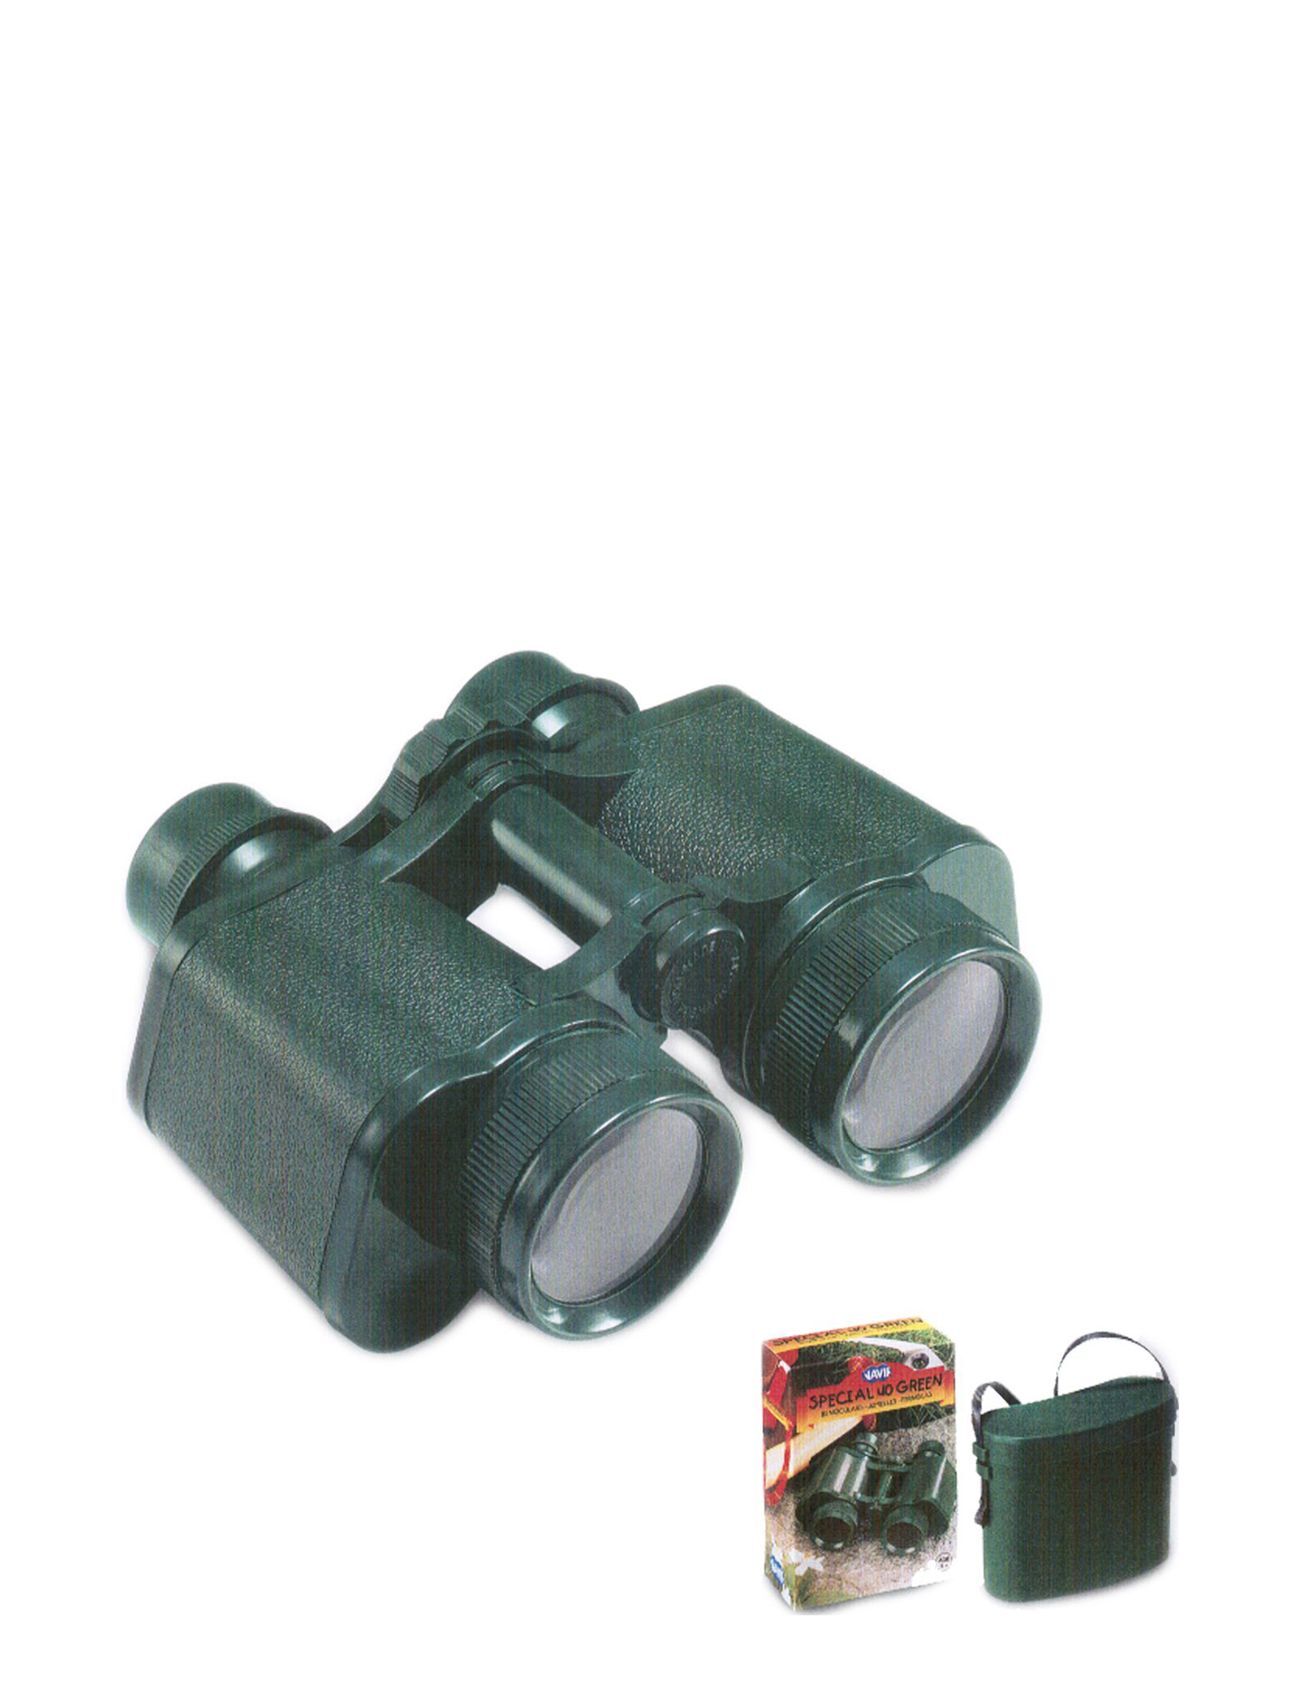 Magni Toys Binoculars With Carrying Case, Navir "Special 40 Green" Toys Outdoor Toys Toy Tools Grønn Magni Toys